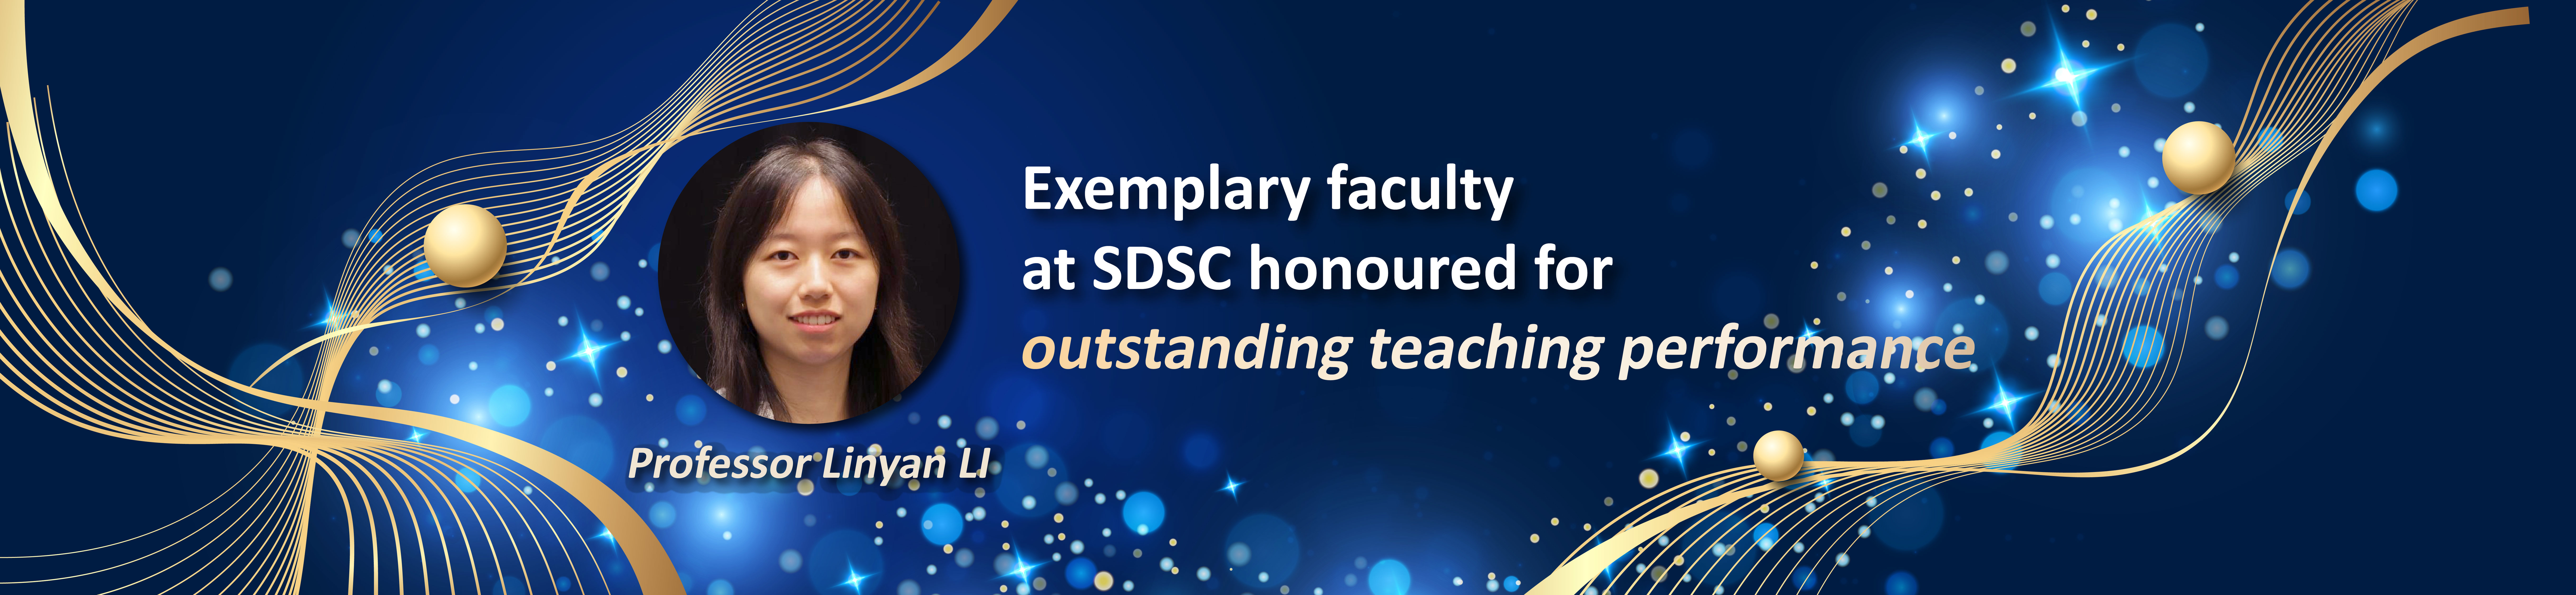 Exemplary faculty at SDSC honoured for outstanding teaching performance